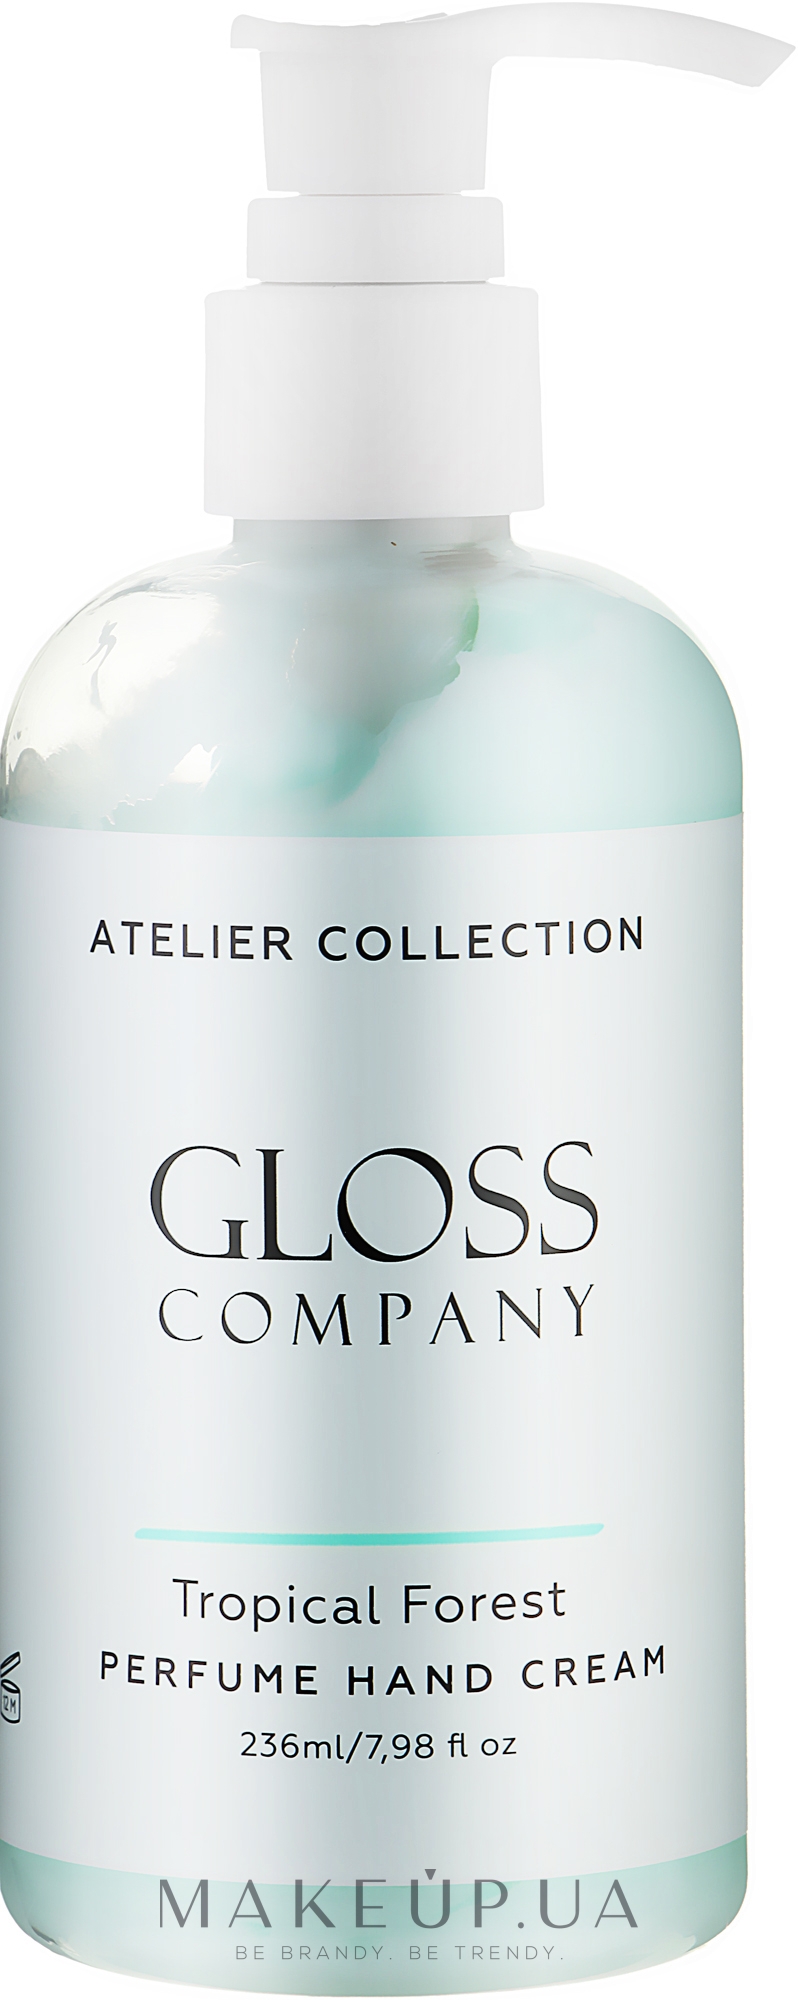 Крем для рук - Gloss Company Tropical Forest Atelier Collection — фото 236ml